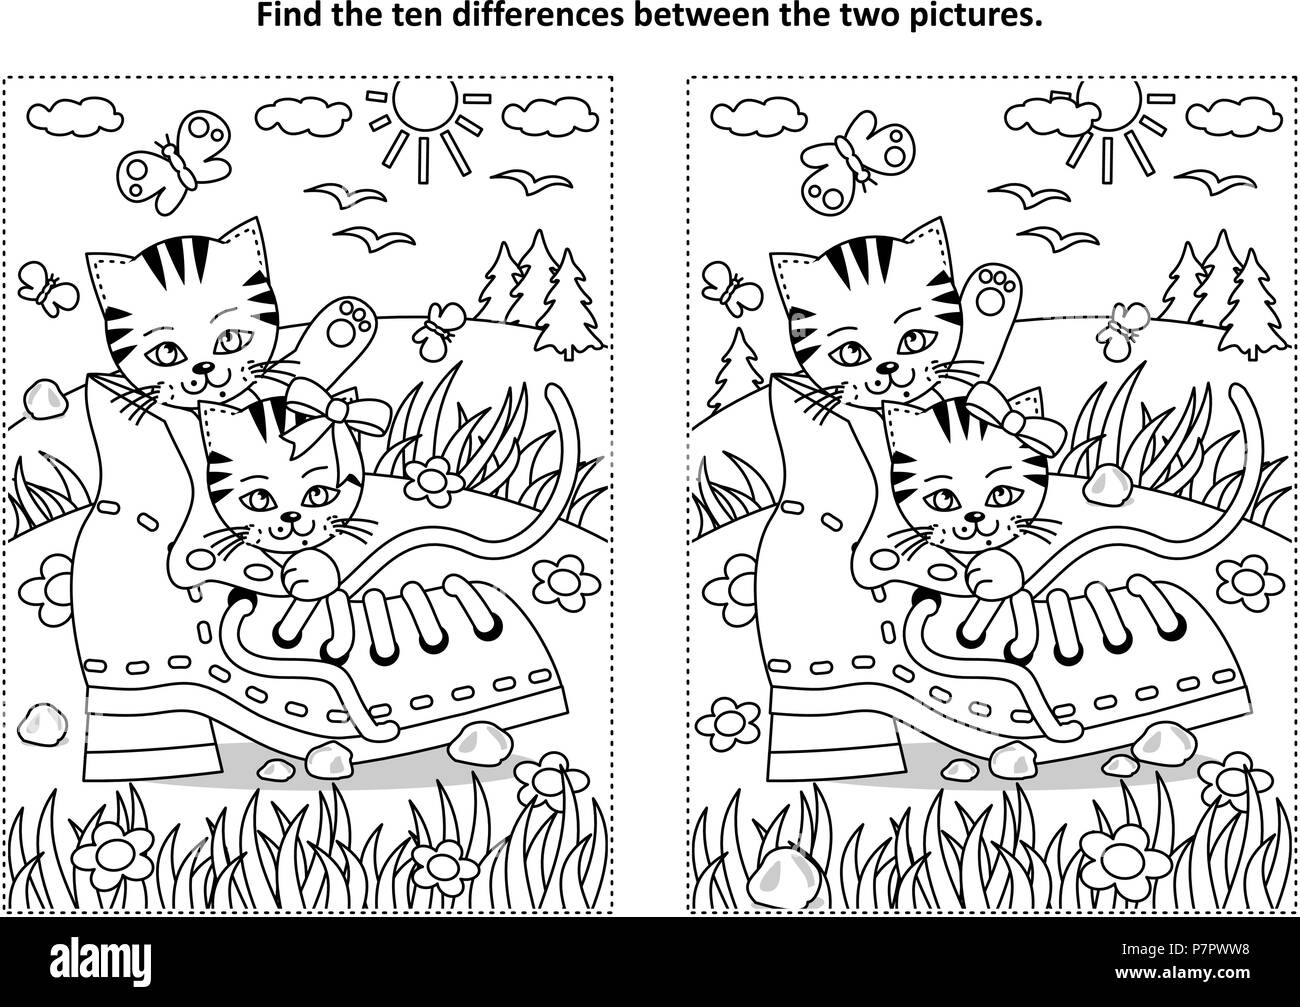 spot-the-difference-black-and-white-printable